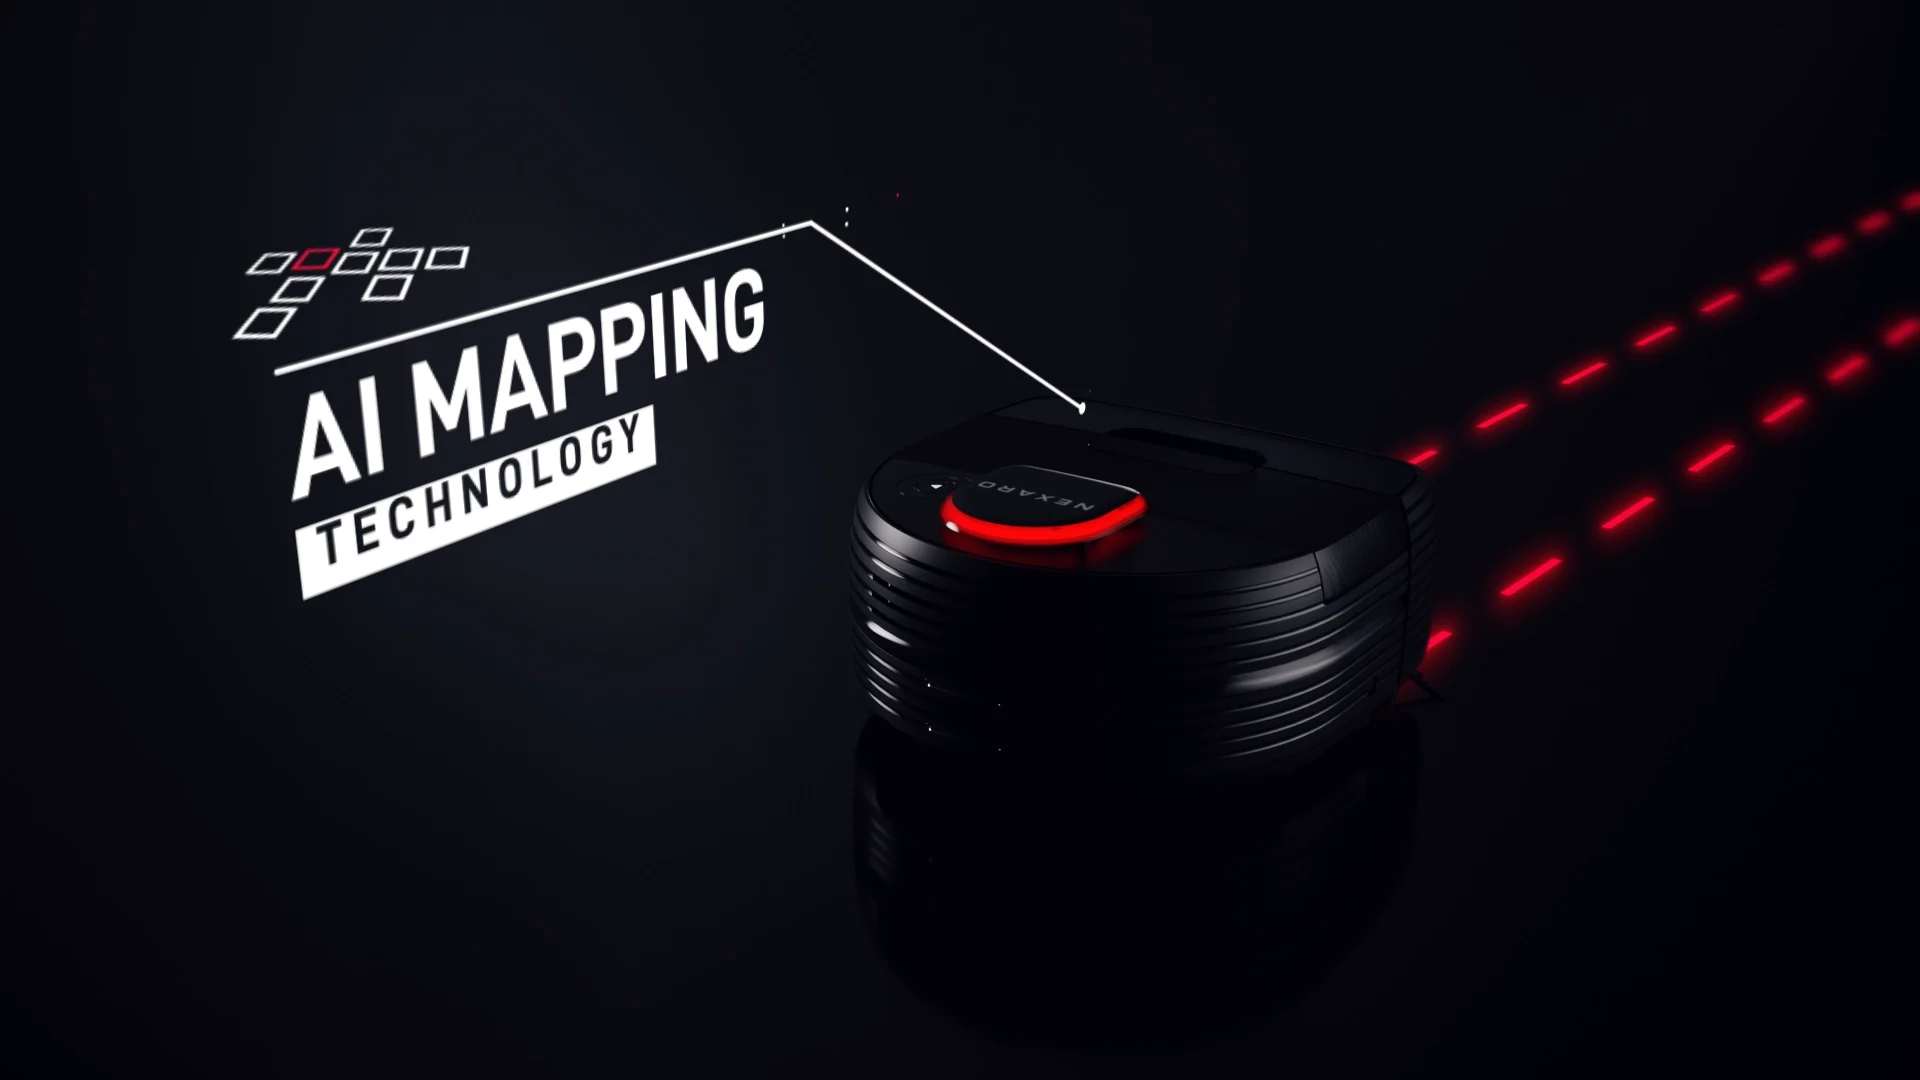 a close up of a black nexaro vacuum cleaner robot with a text overlay saying AI MAPPING TECHNOLOGY